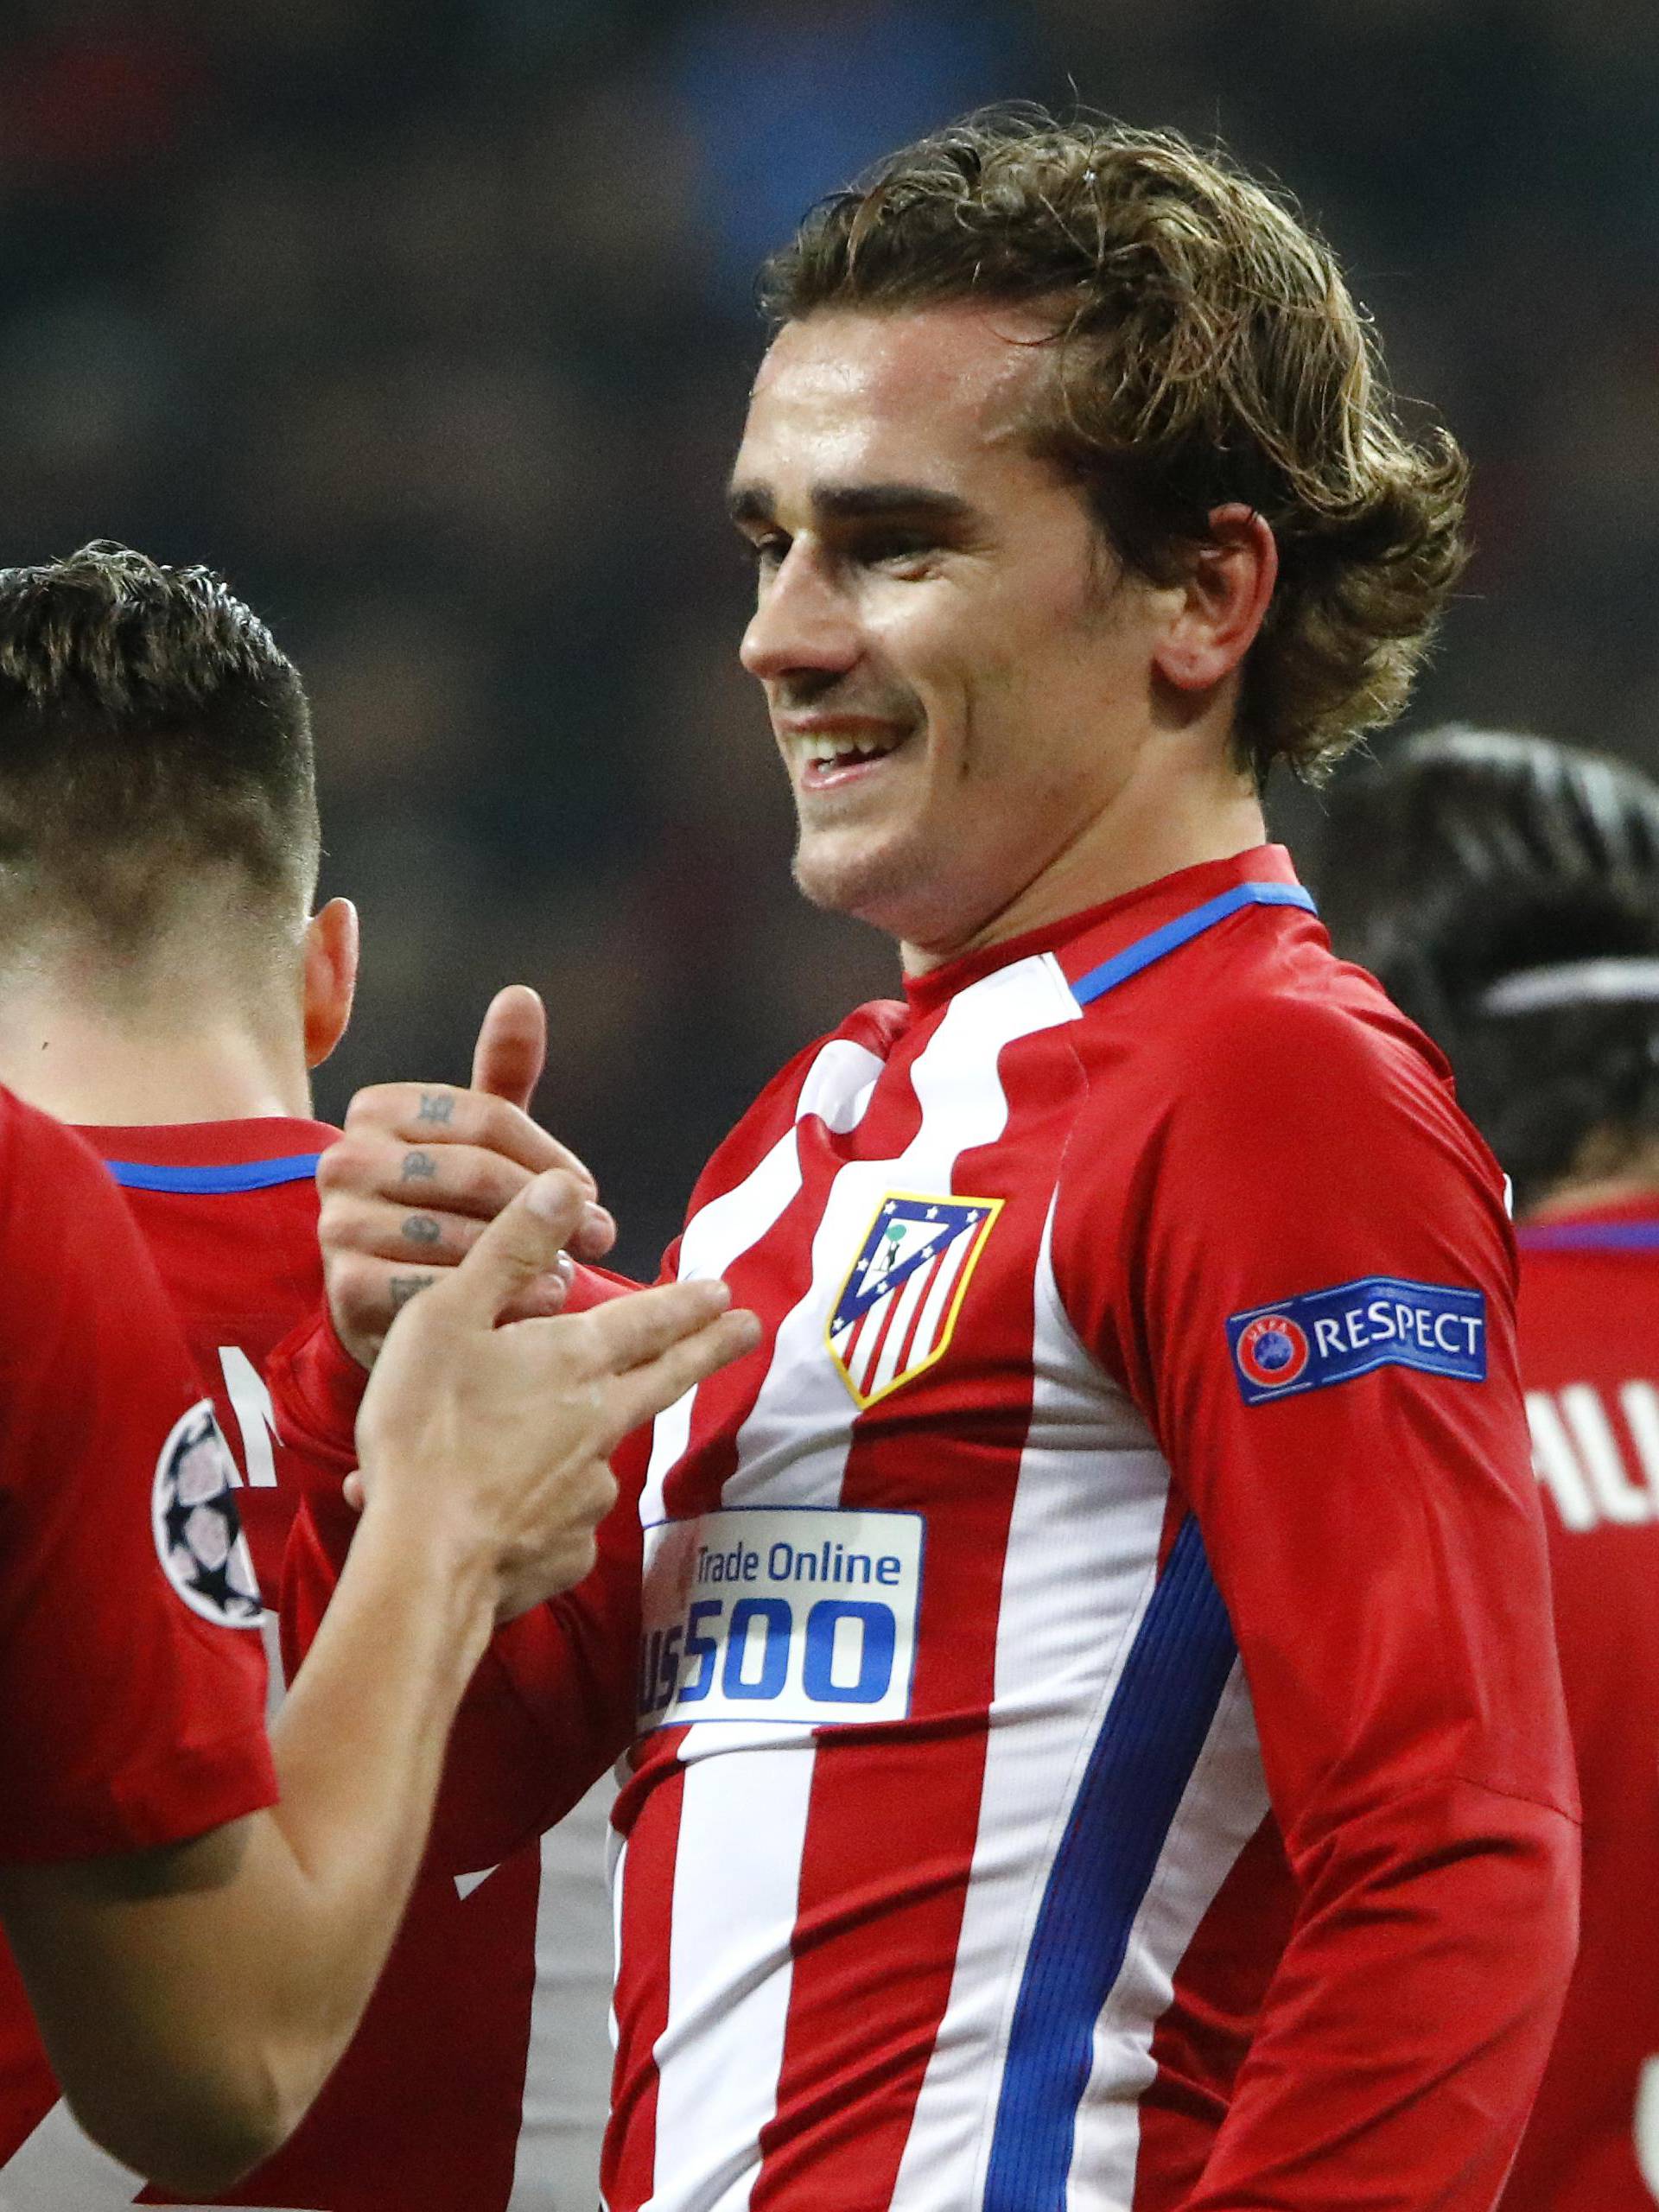 Atletico Madrid's Antoine Griezmann celebrates scoring their second goal with Koke and teammates